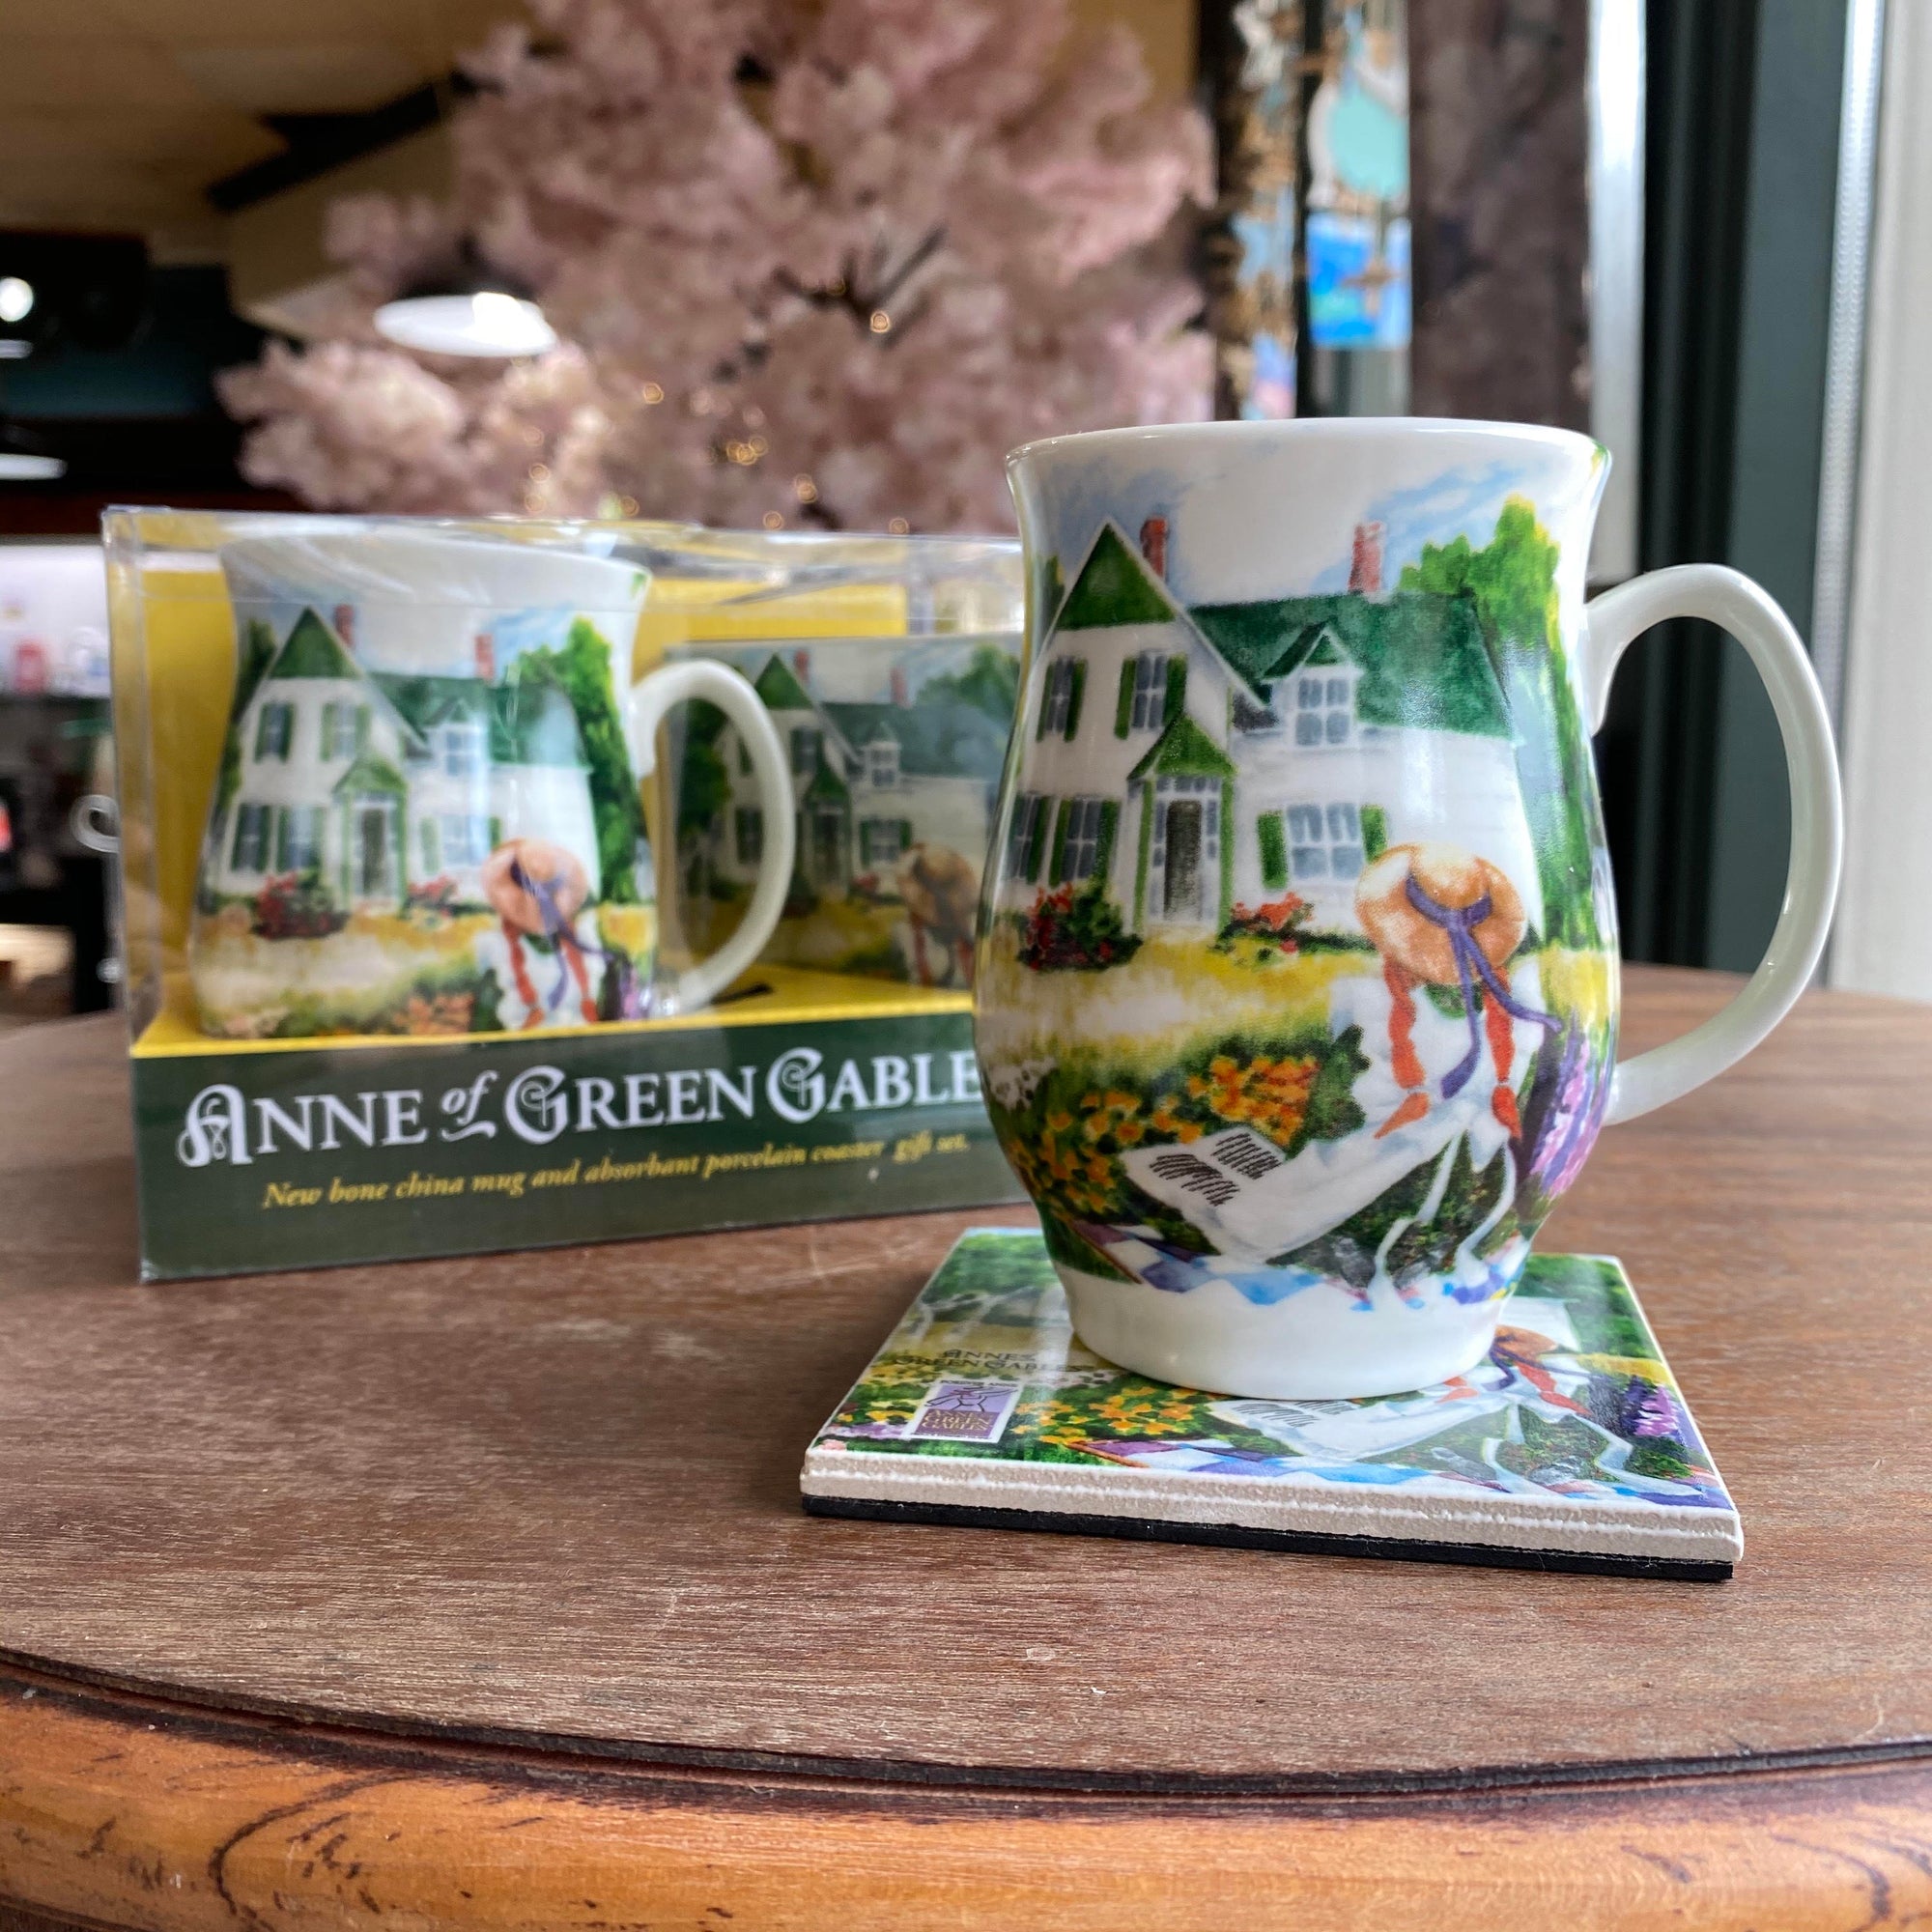 Anne of Green Gables mug and Coaster